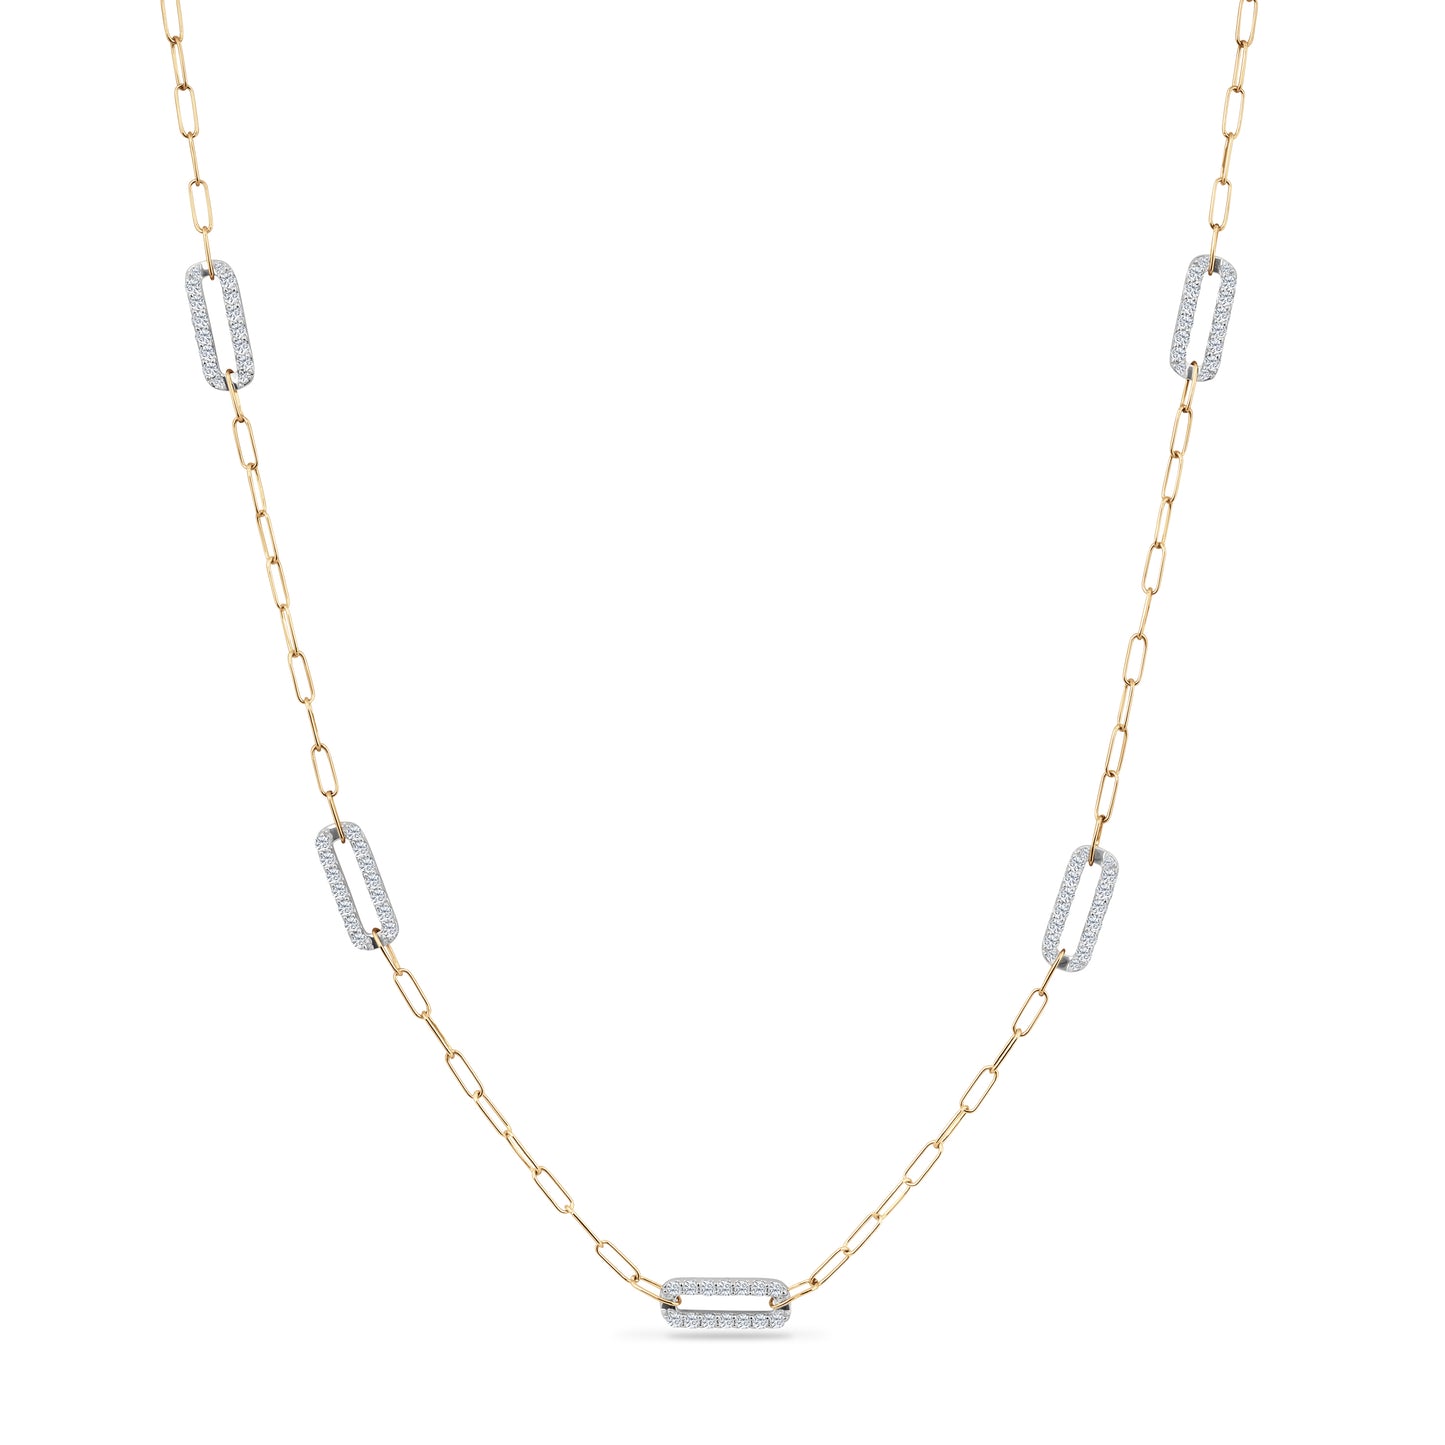 14K TWO TONE NECKLACE IN 5 PAPER CLIP SHAPE DESIGN WITH 150 DIAMONDS 2.05CT ON  18 INCHES CHAIN